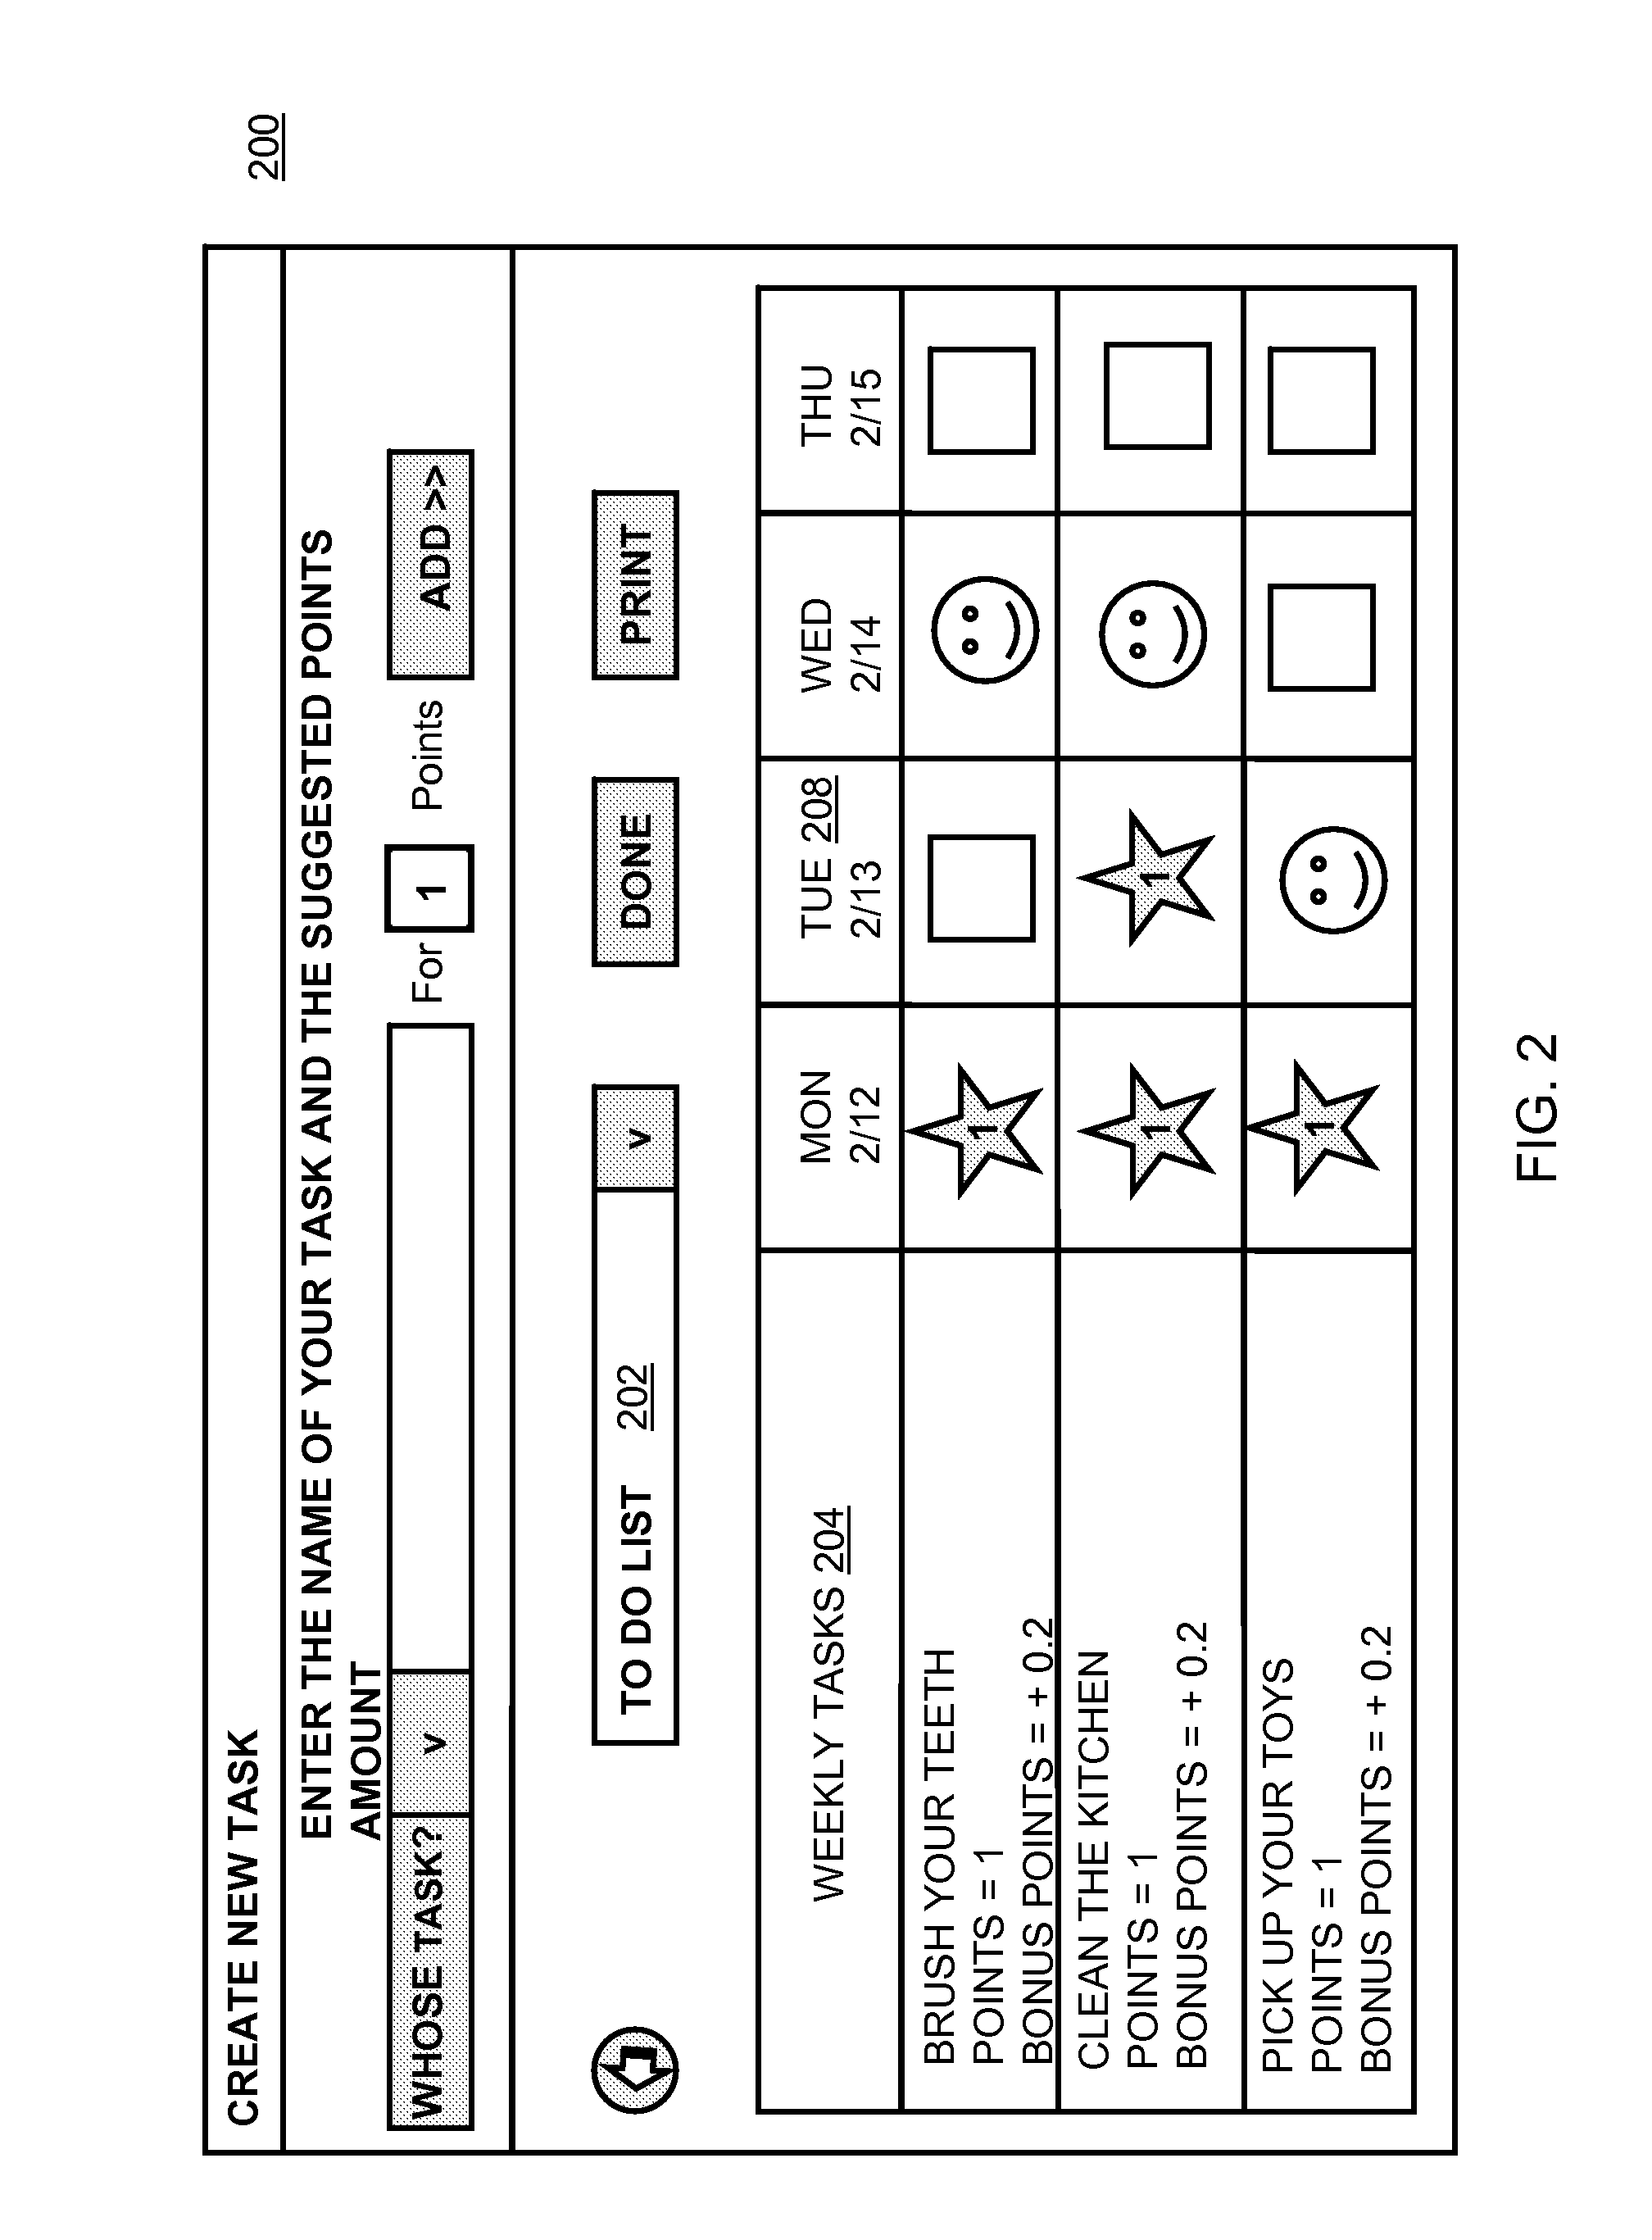 Systems and methods of managing tasks assigned to an individual